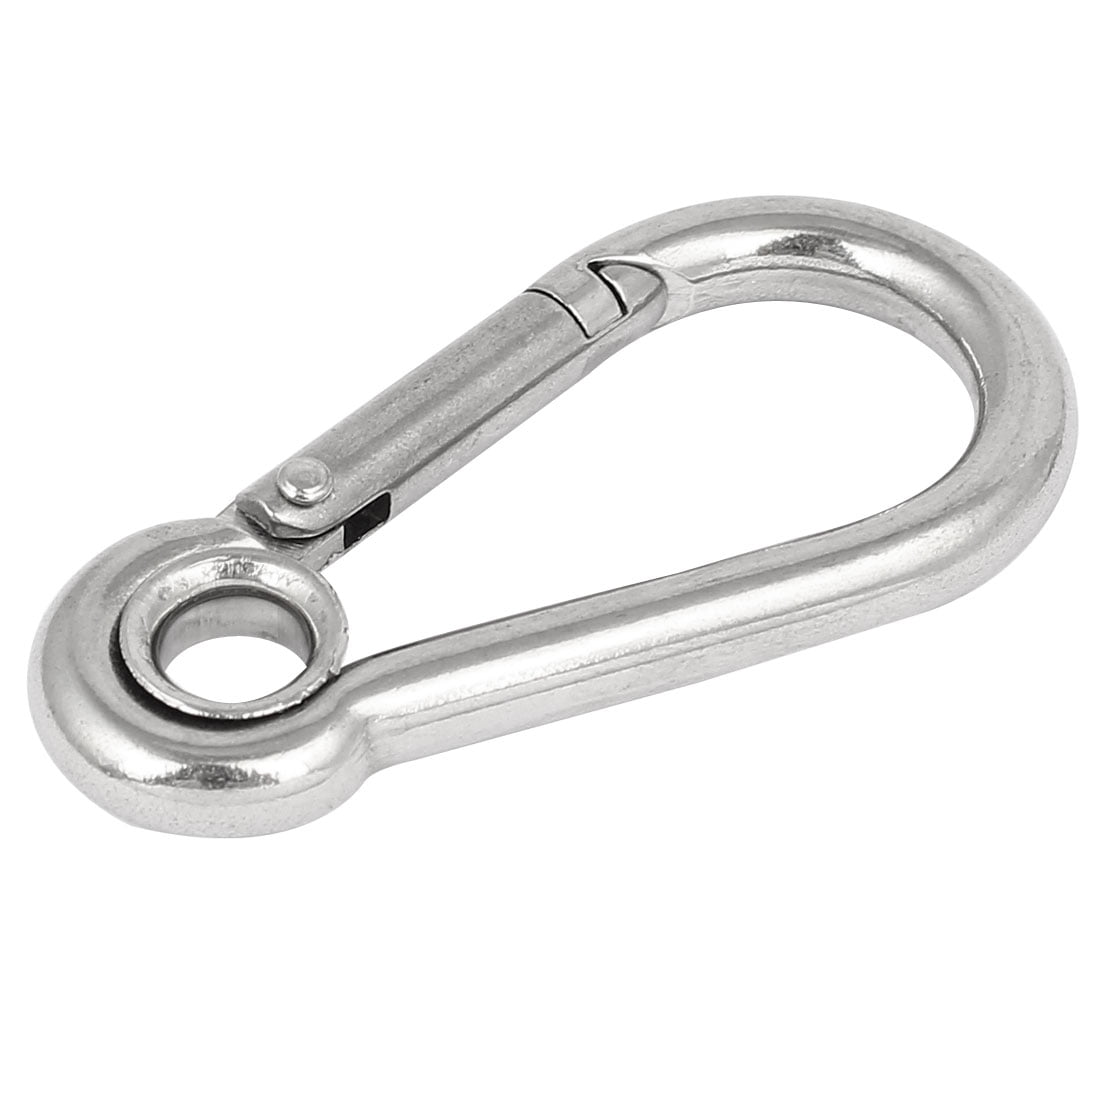 2 inch Carabiner Clip-Caribeener Clips 304 Stainless Steel Spring Snap Hook Cl 